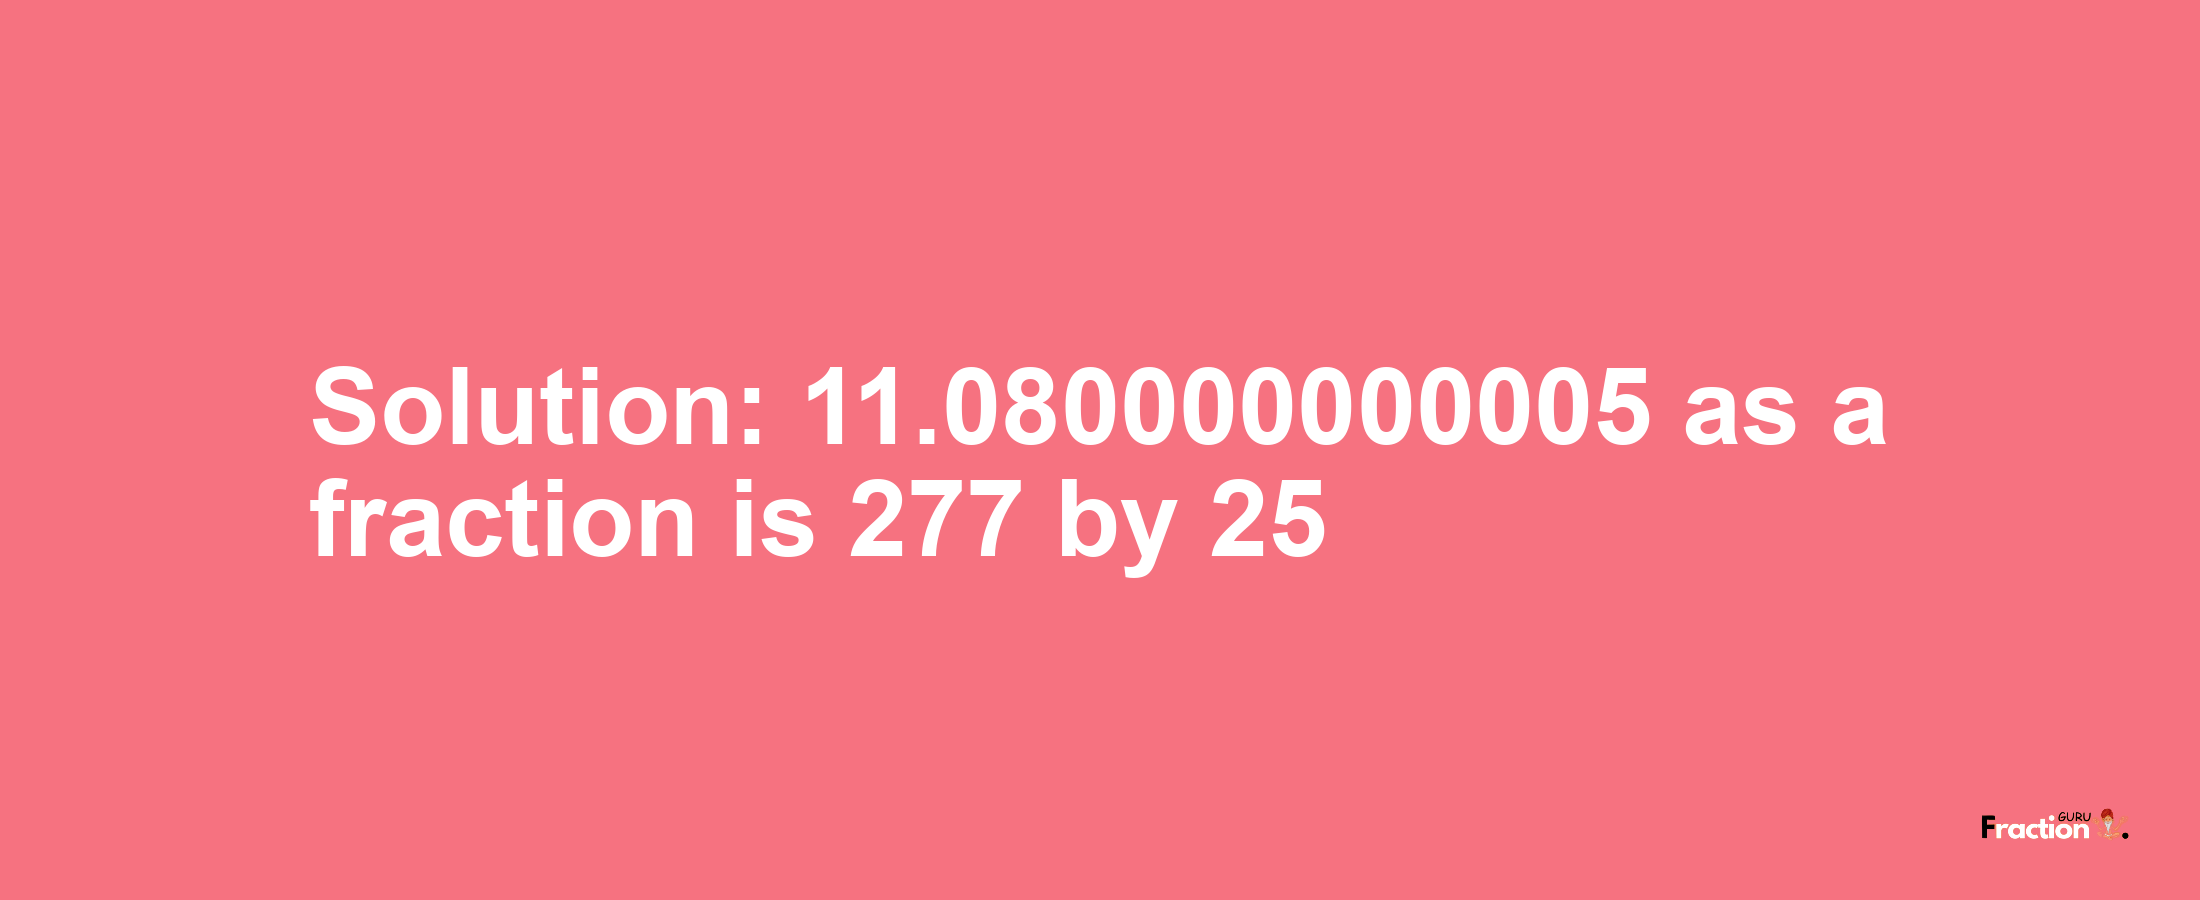 Solution:11.080000000005 as a fraction is 277/25